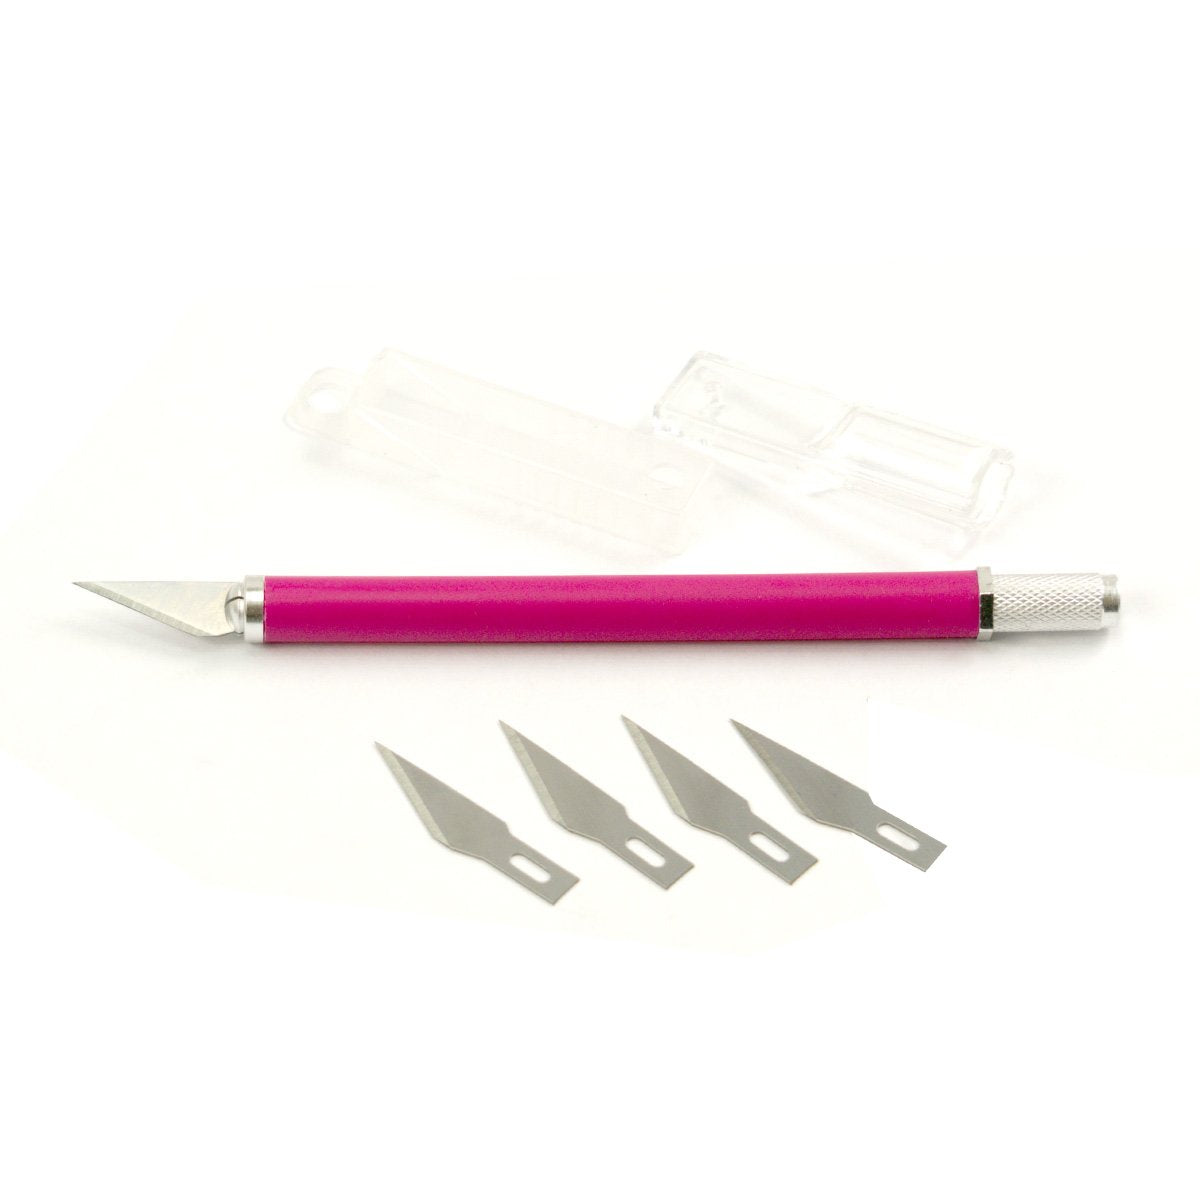 Precision Craft Knife with pink rubber handle